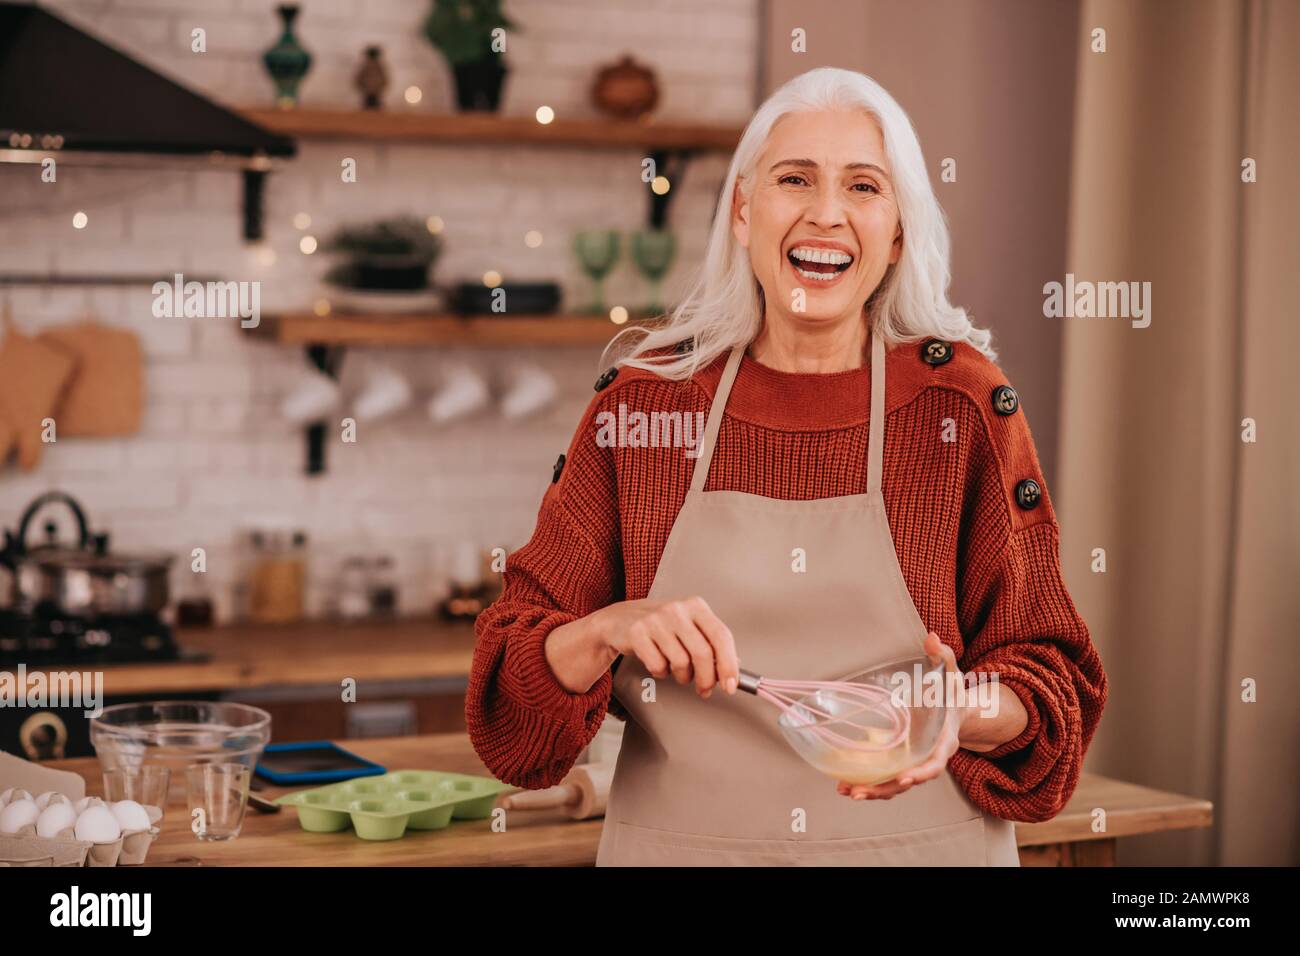 Grey-haired smiling lady smiling bright whipping milk in a bowl Stock Photo